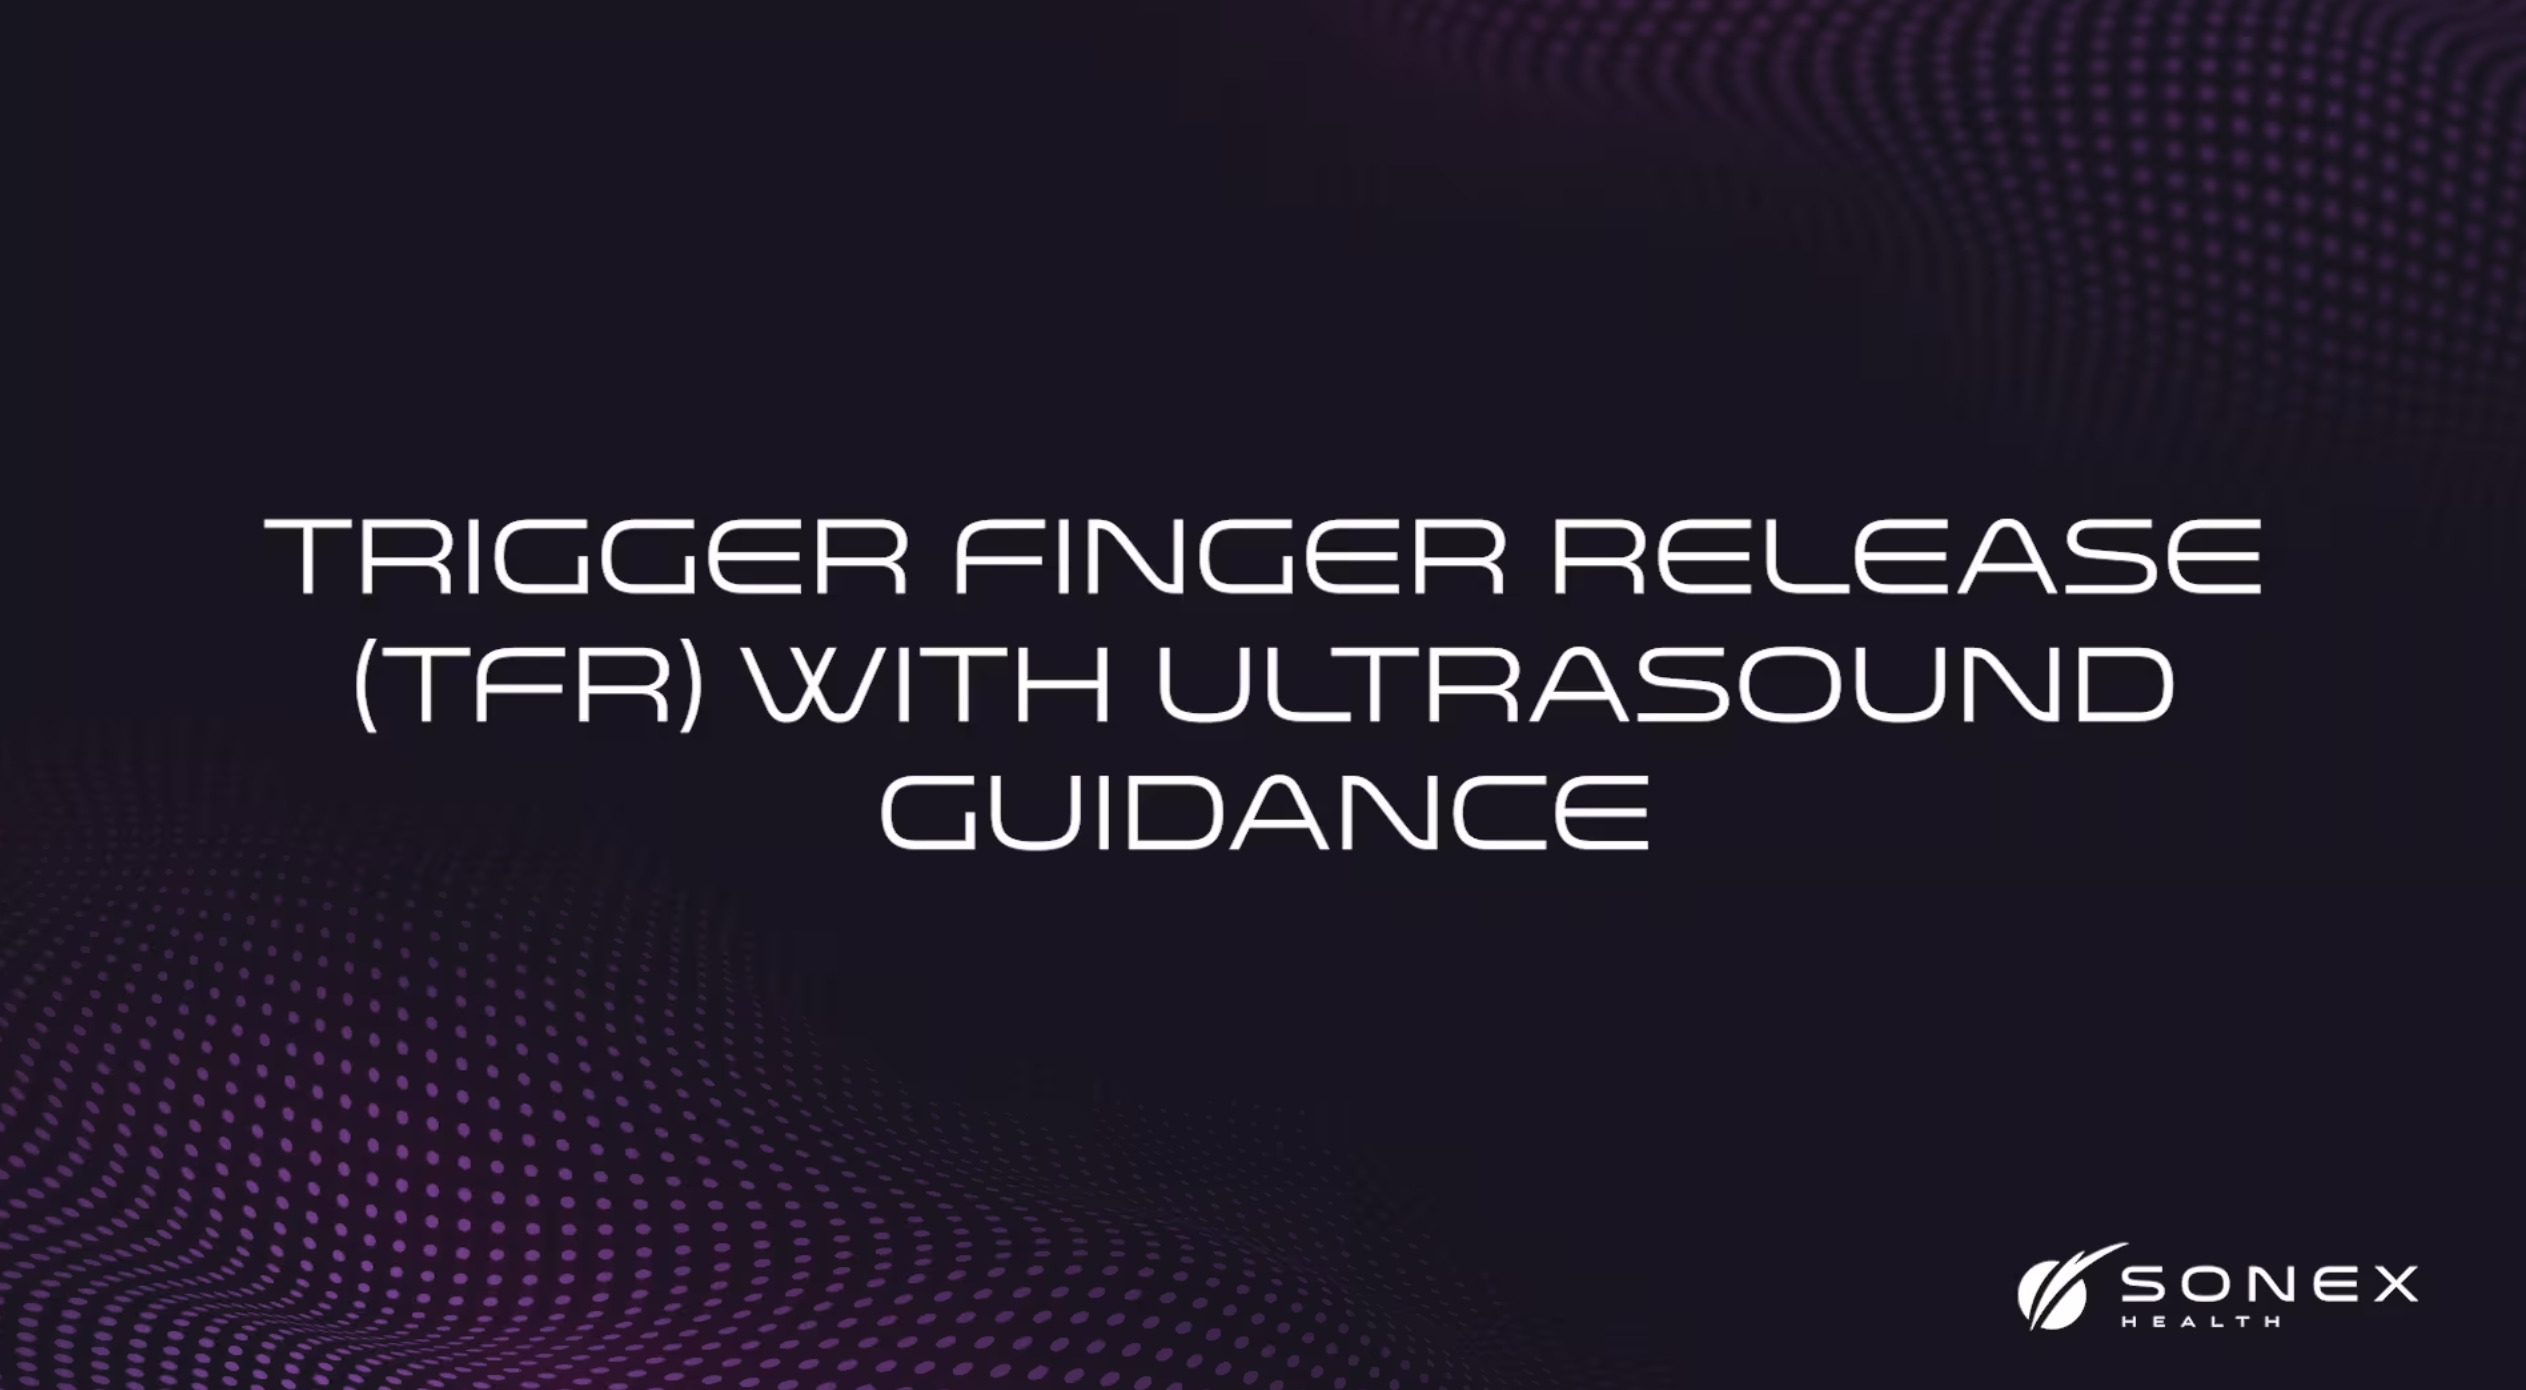 Trigger Finger Release (TFR) with Ultrasound Guidance